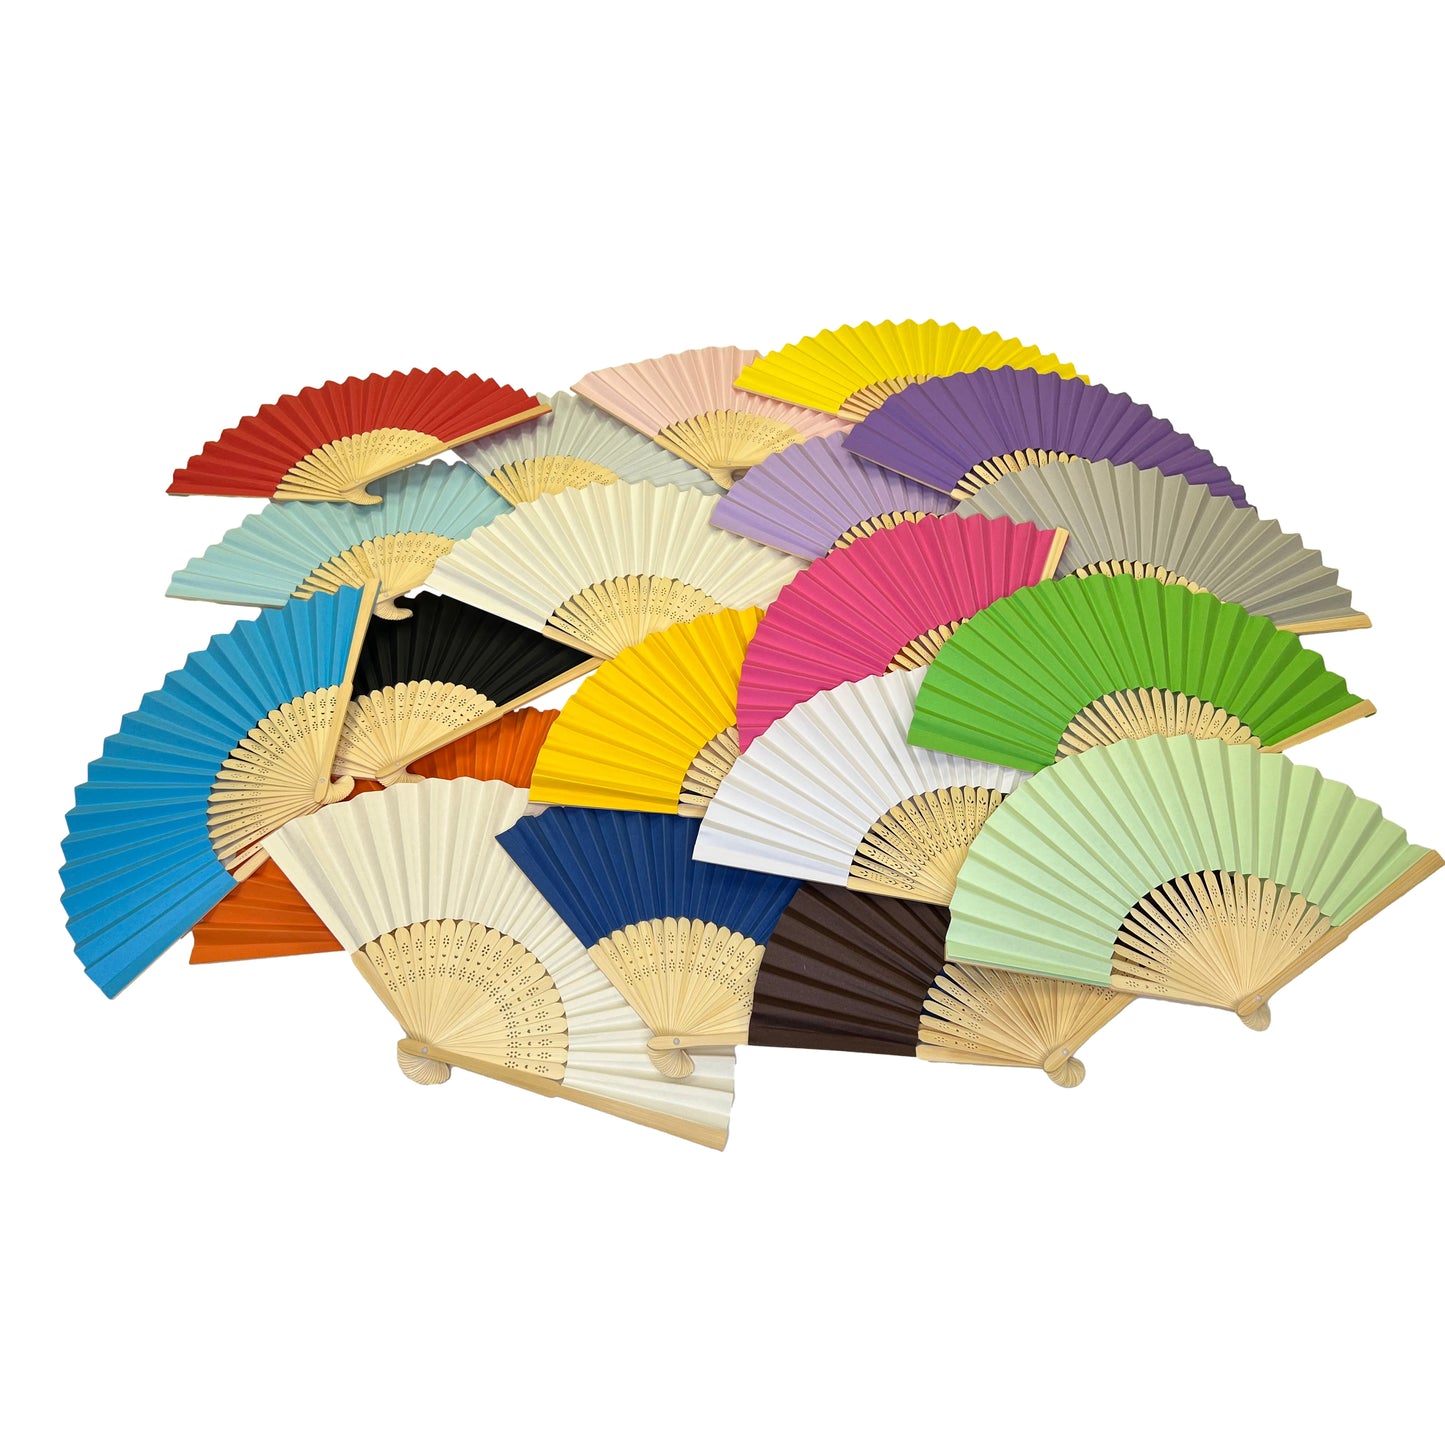 Pack of 500 Pink Paper Foldable Hand Held Bamboo Wooden Fans by Parev